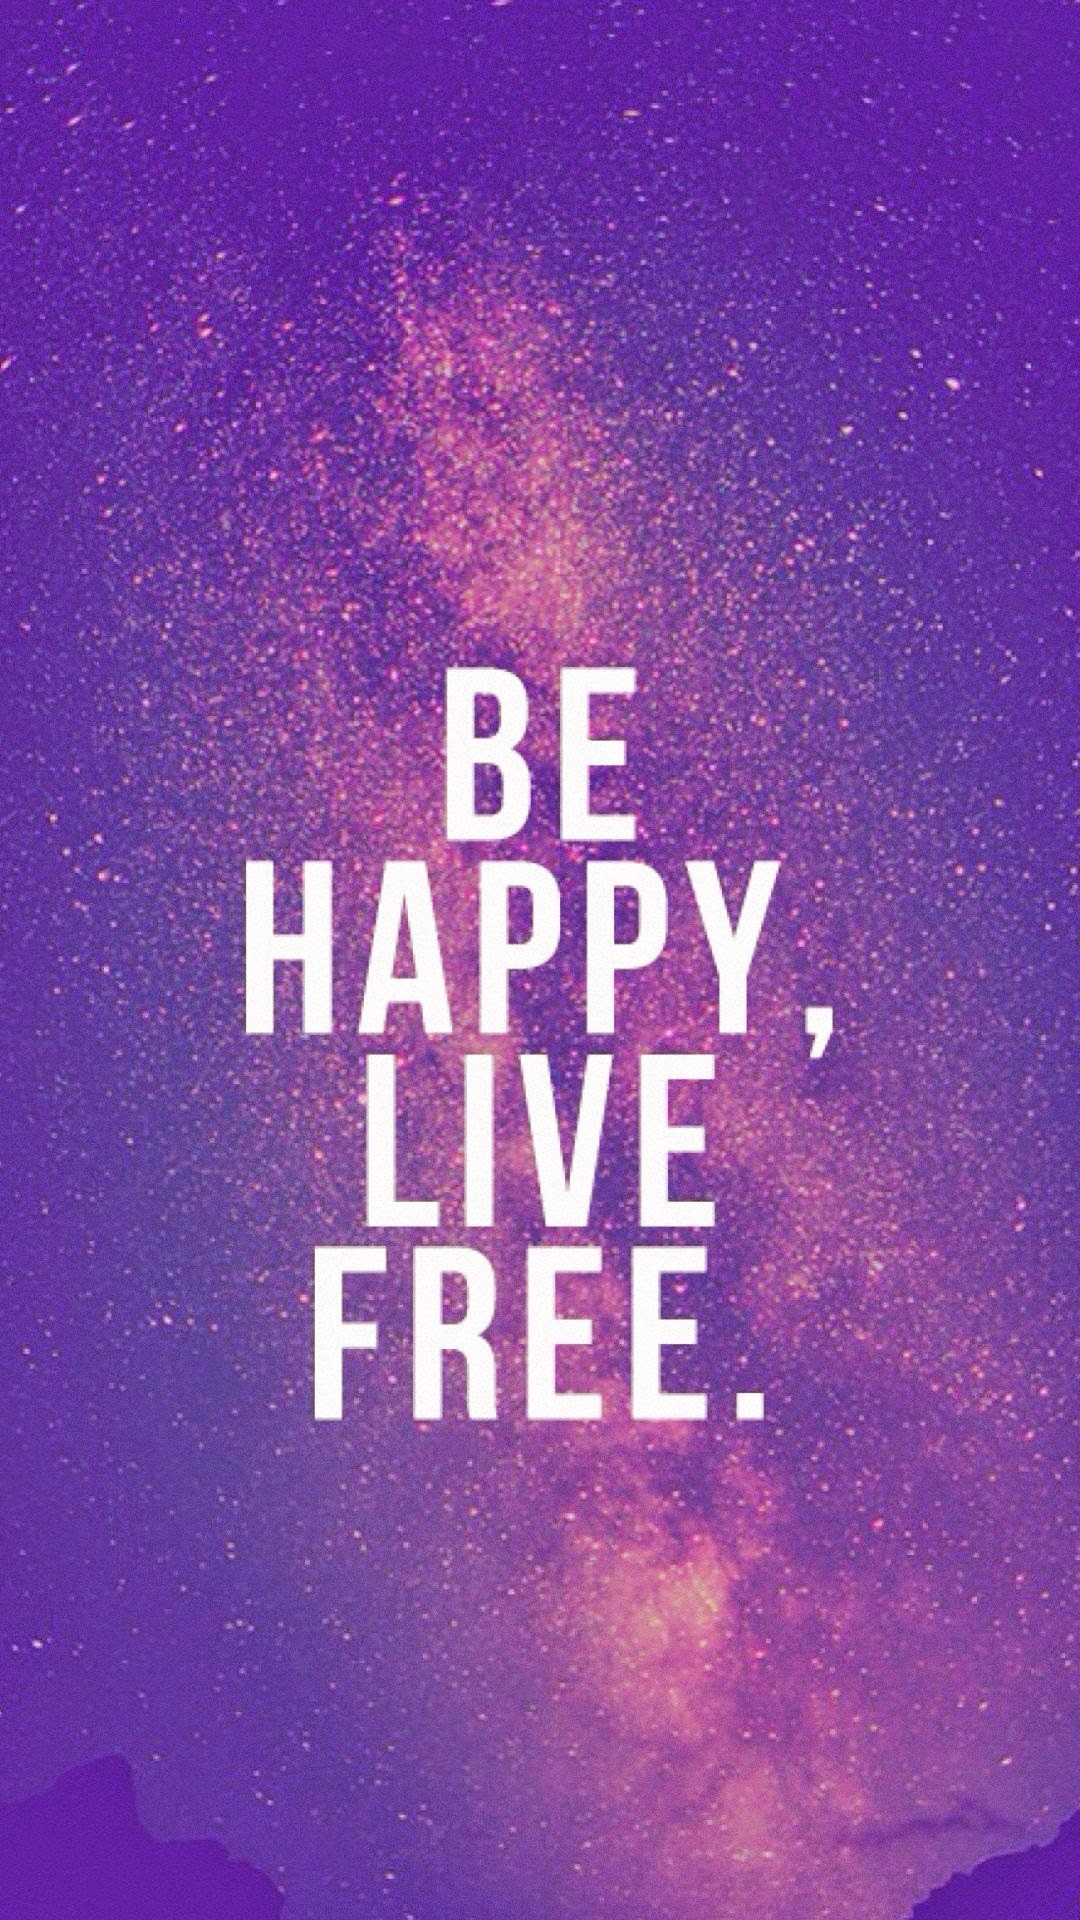 1080x1920 Be-Happy-Live-Free-Tap-to-see-New-